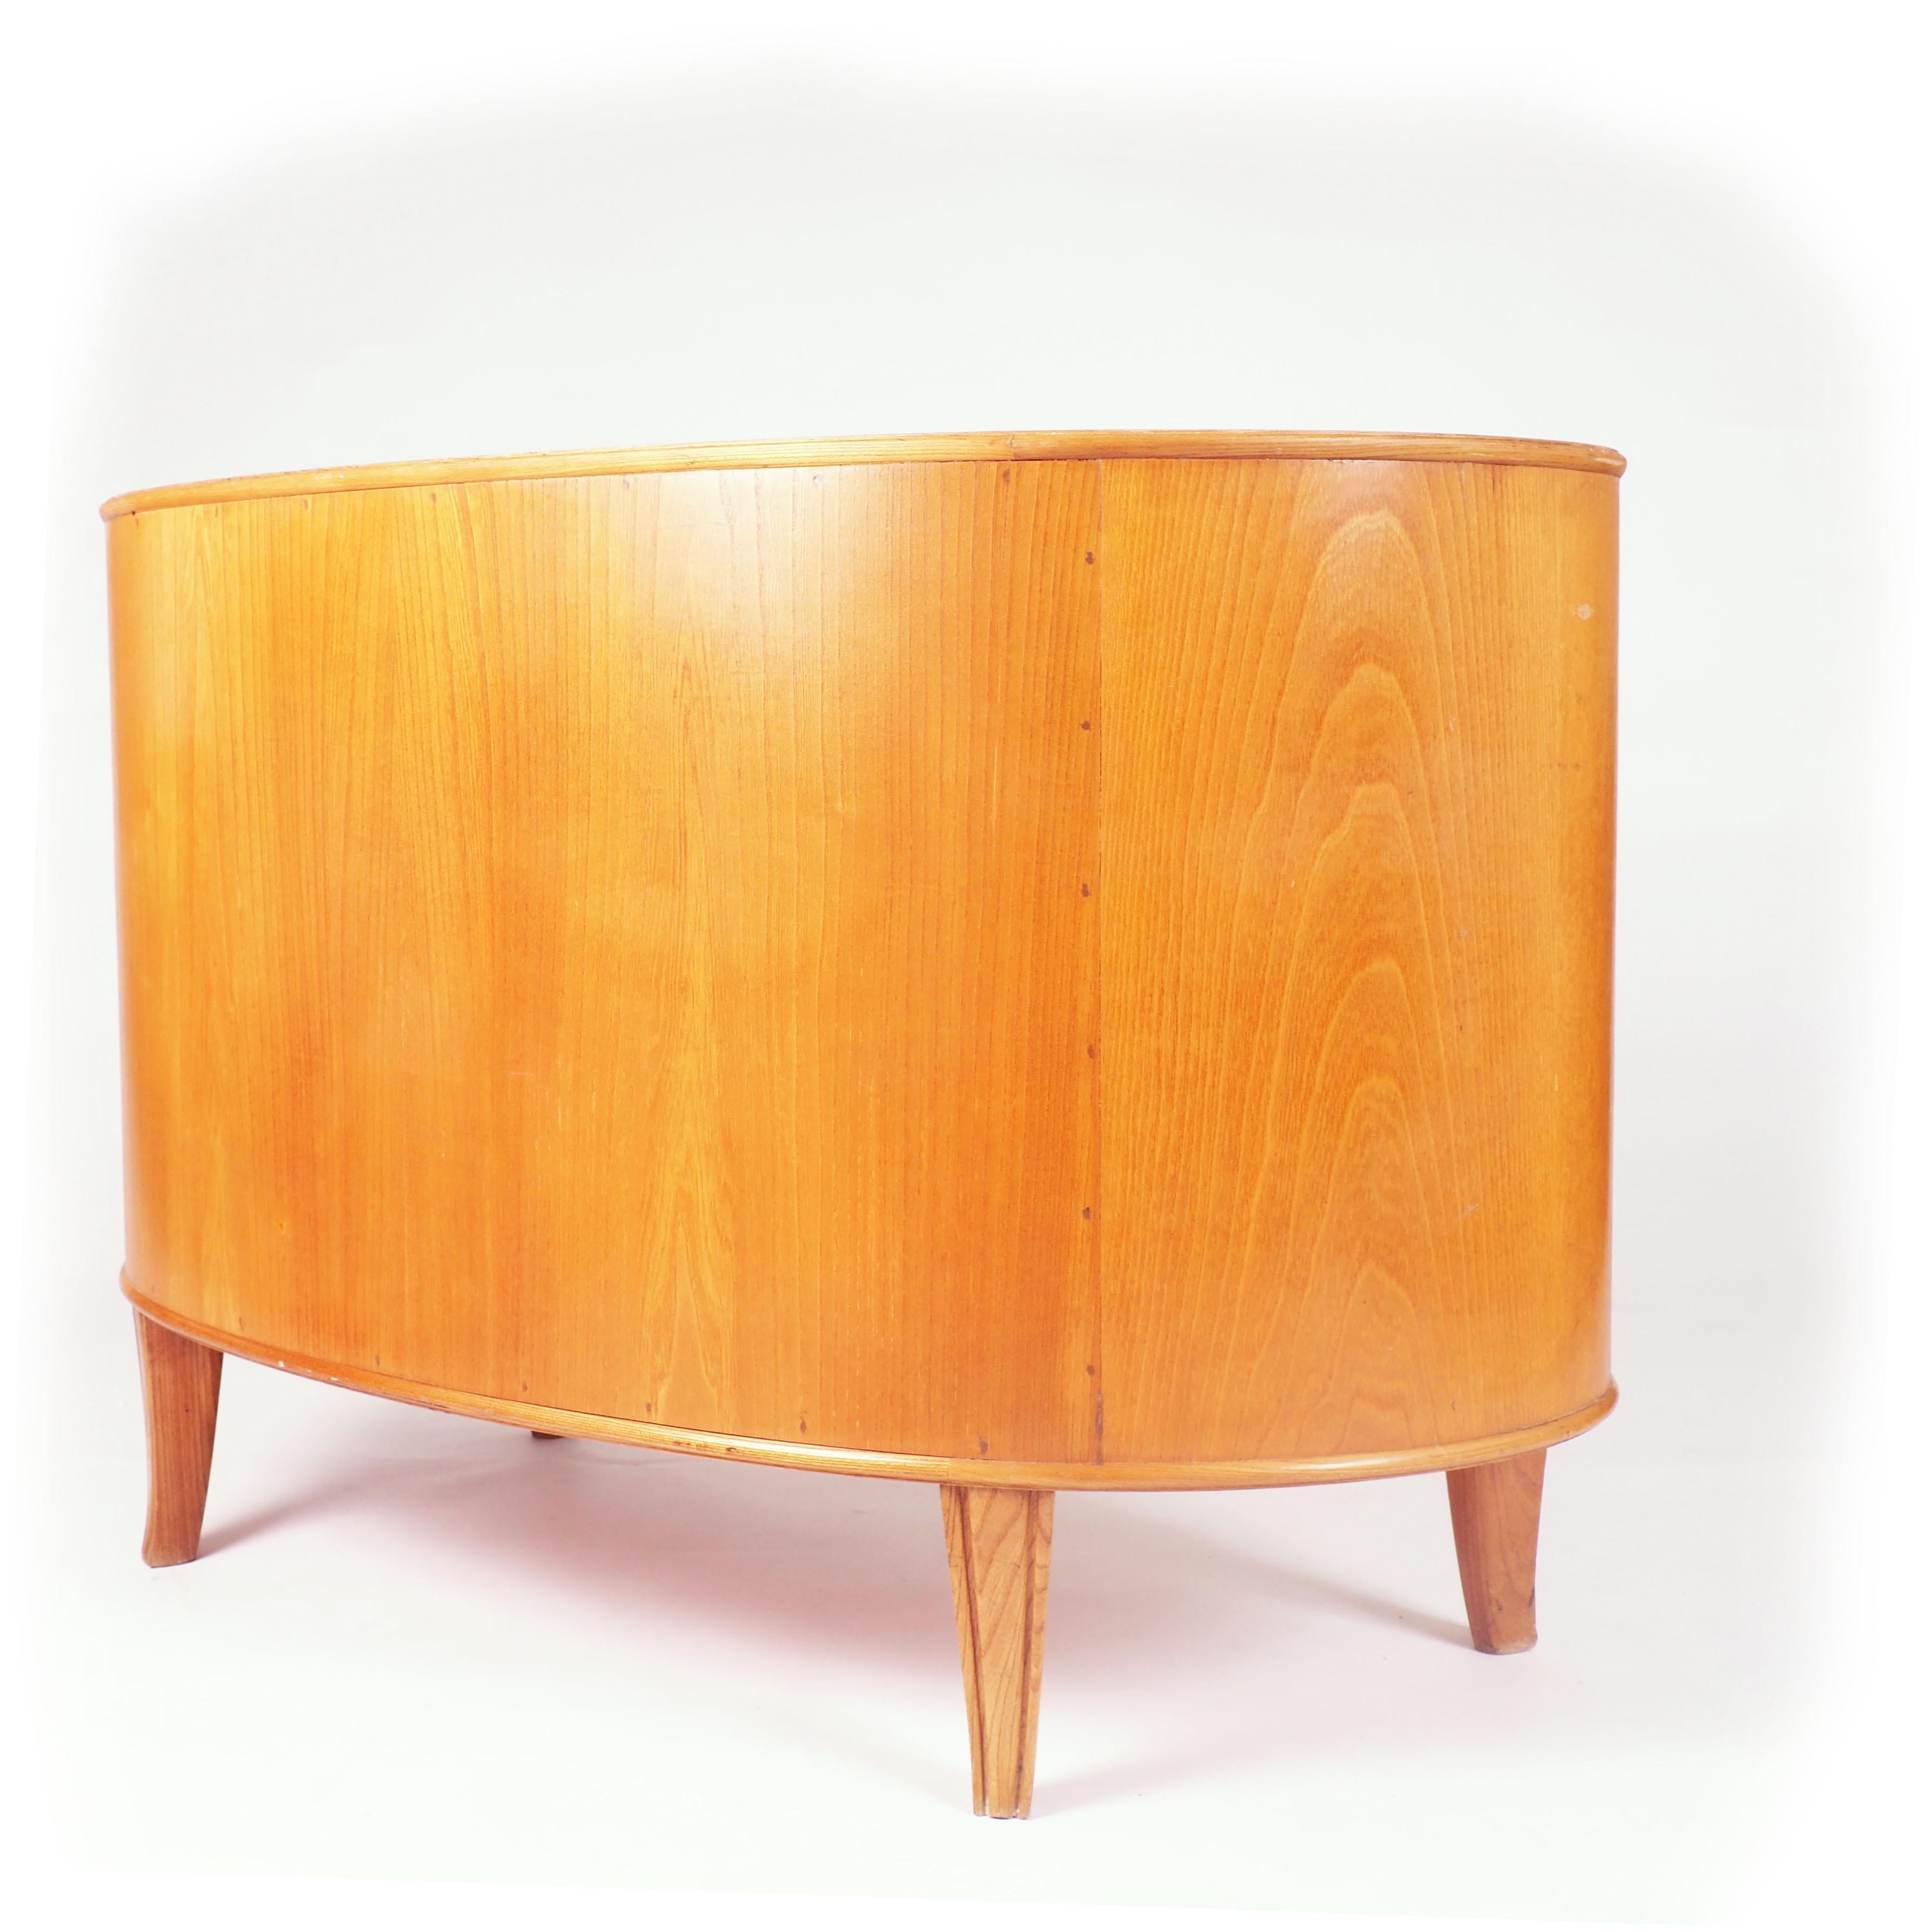 Elm Axel Larsson Kidney Shaped Chest of Drawers Made by Bodafors, Sweden For Sale